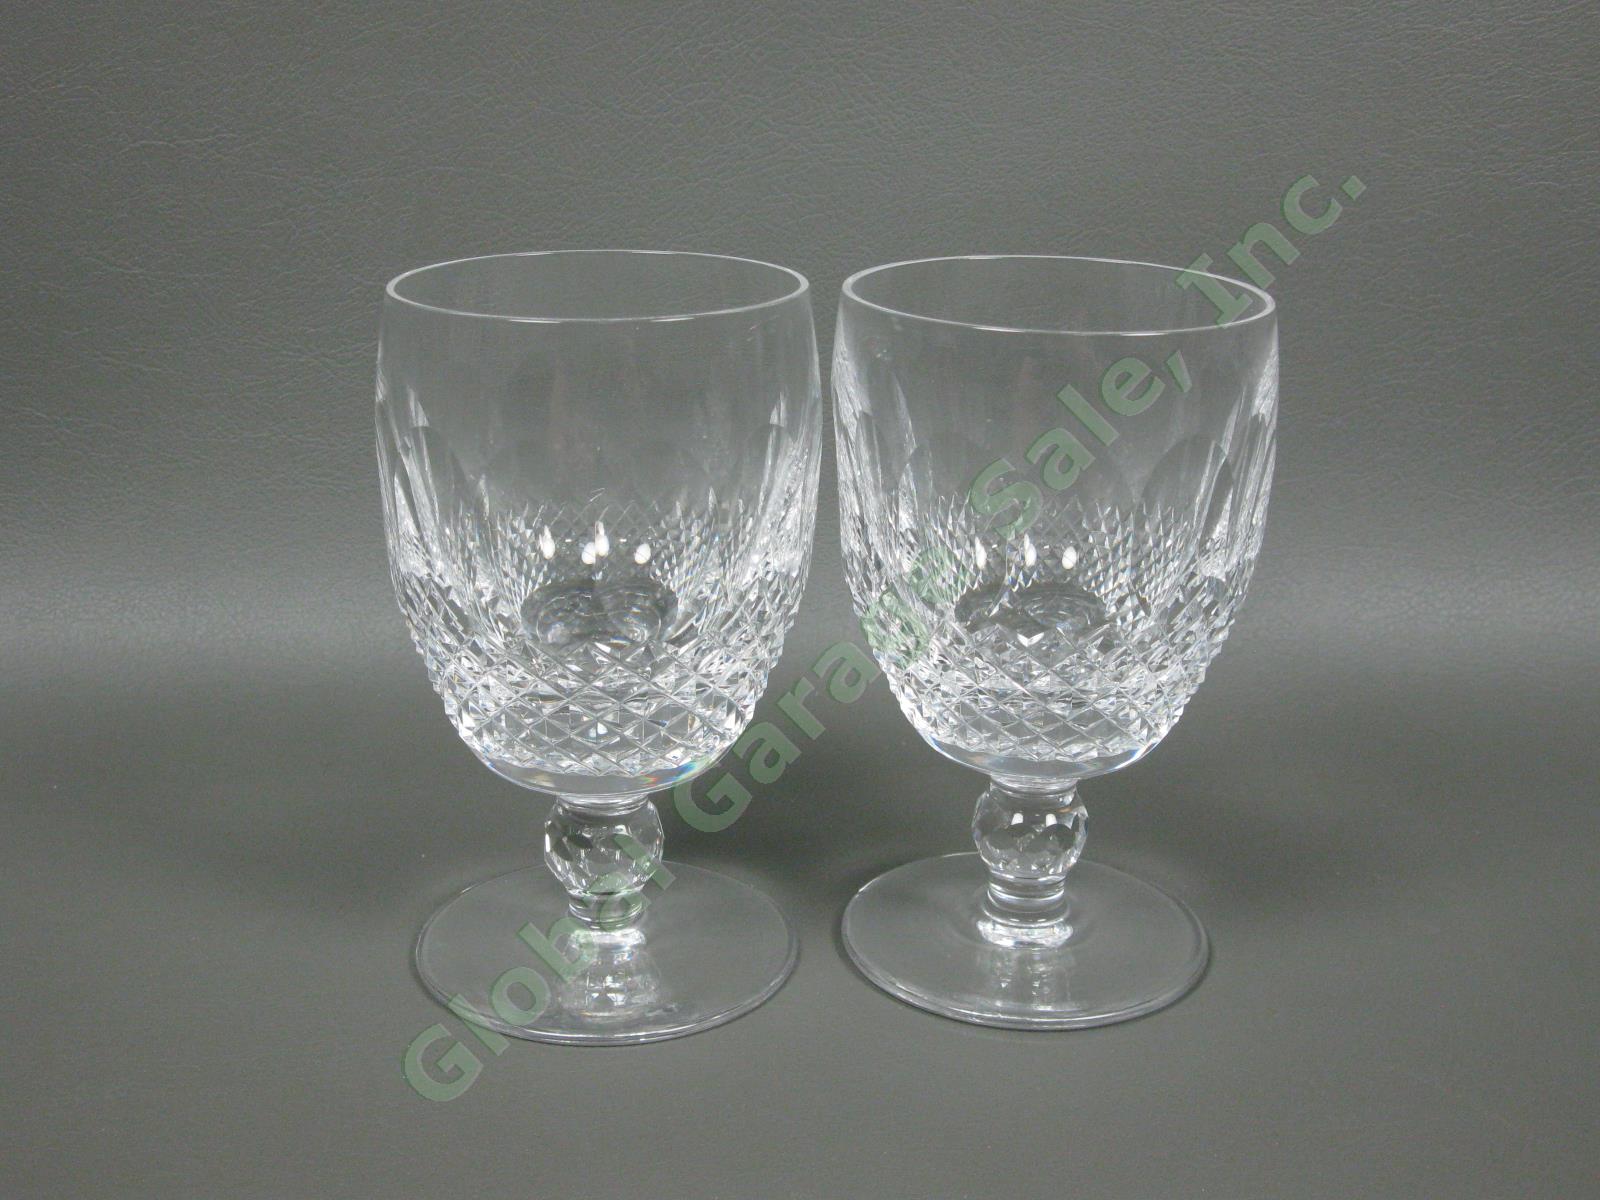 4 Waterford Crystal Colleen 5 1/4" Water Goblet Wine Glass Set Vintage Retired 2